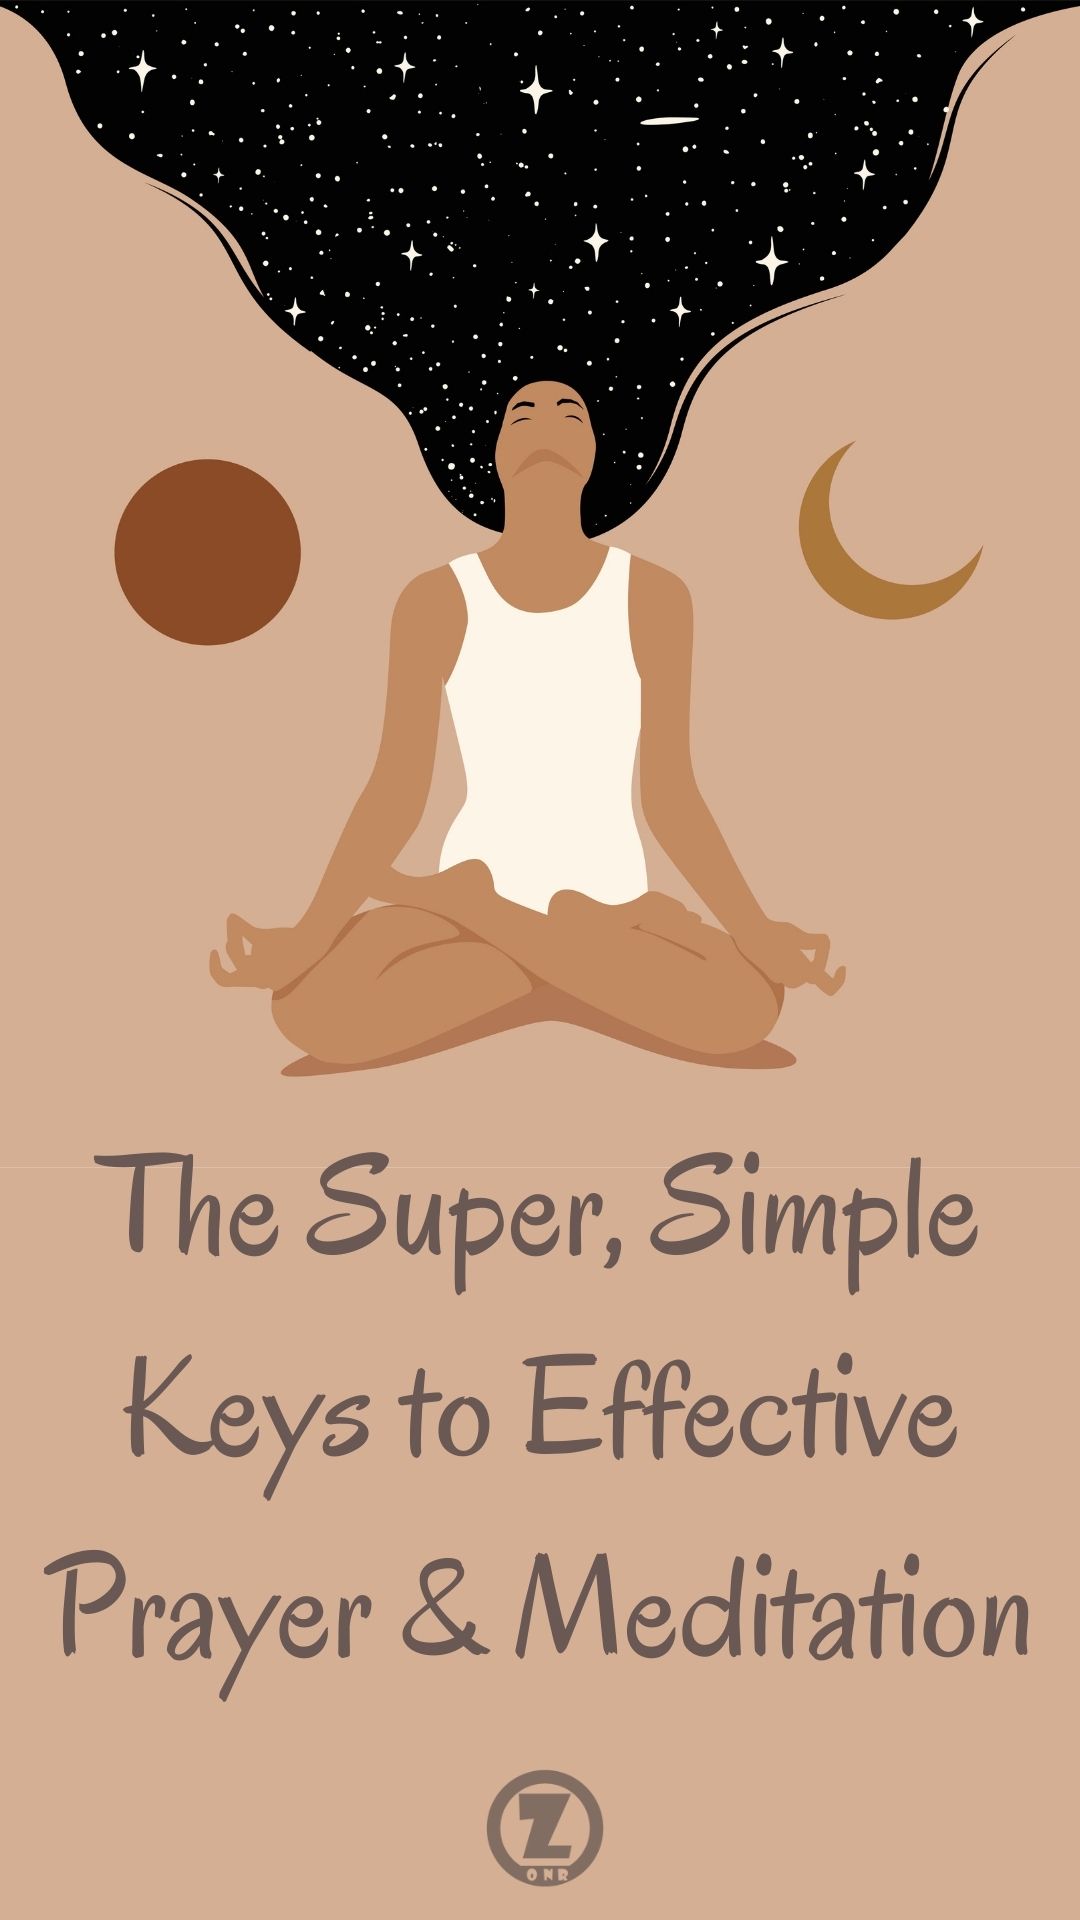 You are currently viewing The Super, Simple Keys to Effective Prayer and Meditation – Step 11 ends